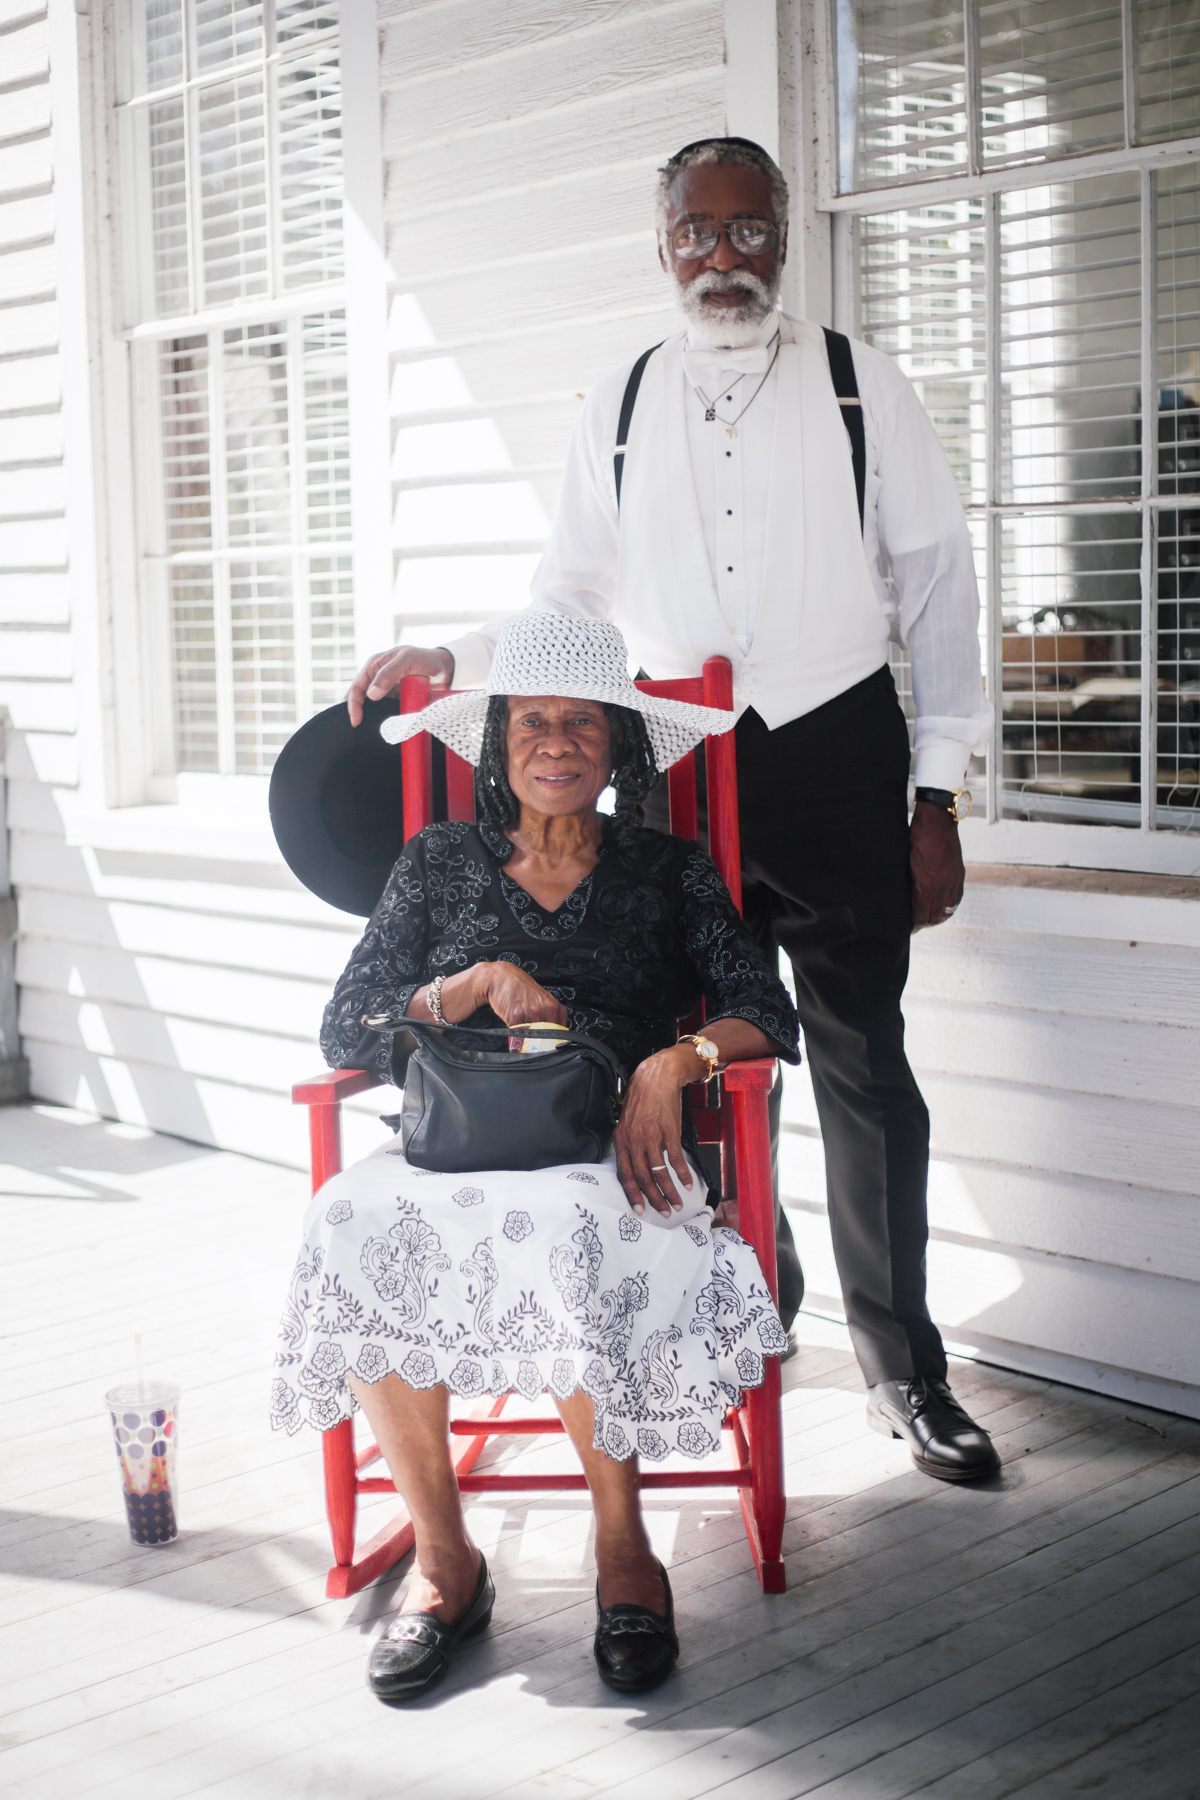  Dr. Collins serves as the chairman of the McIntosh County Historic Preservation Commission. Here, he poses for a portrait with Mrs. Eunice M. Moore, a board member of the commission, on the porch of the Burning of Darien museum that houses his offic